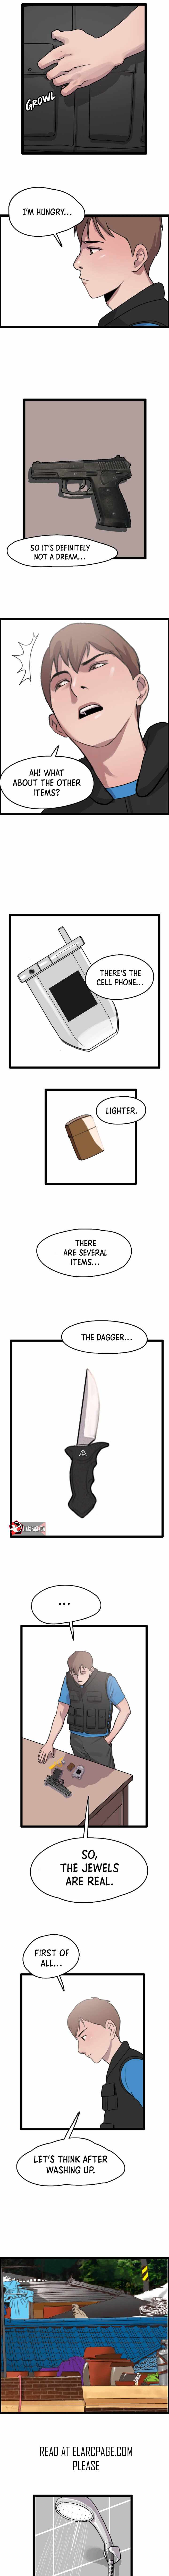 I Picked a Mobile From Another World chapter 5 - page 5